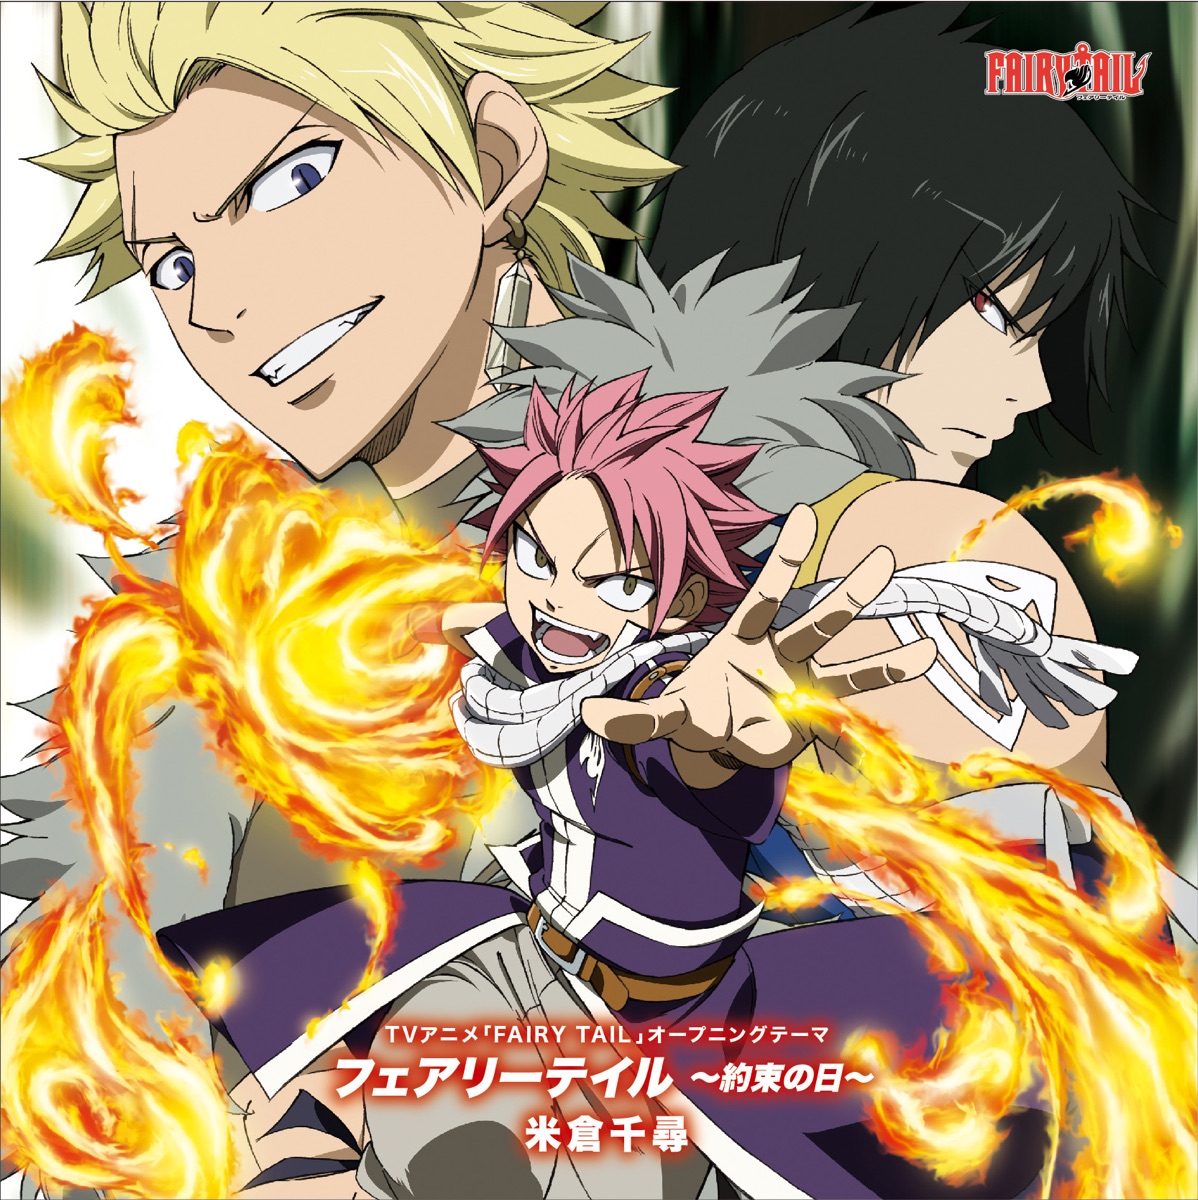 Animated CD Anime 「 FAIRY TAIL 」 Opening and Ending Theme Songs Vol. 2  [Limited Edition with DVD], Music software